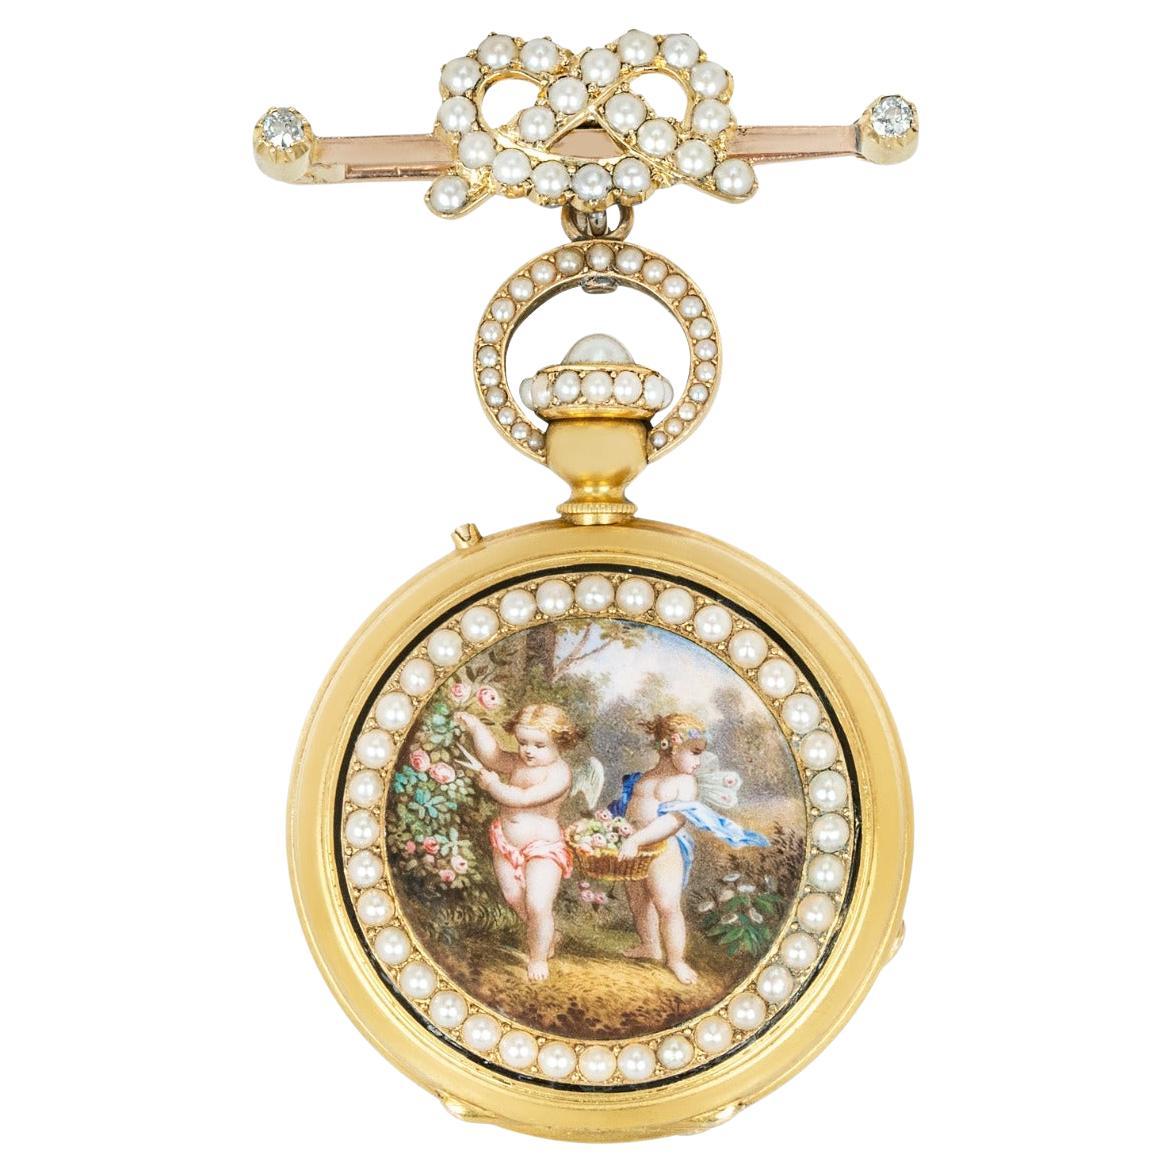 Lund & Blockley. A Gold Enamel and Pearl Full Hunter Fob Watch C1880 For Sale